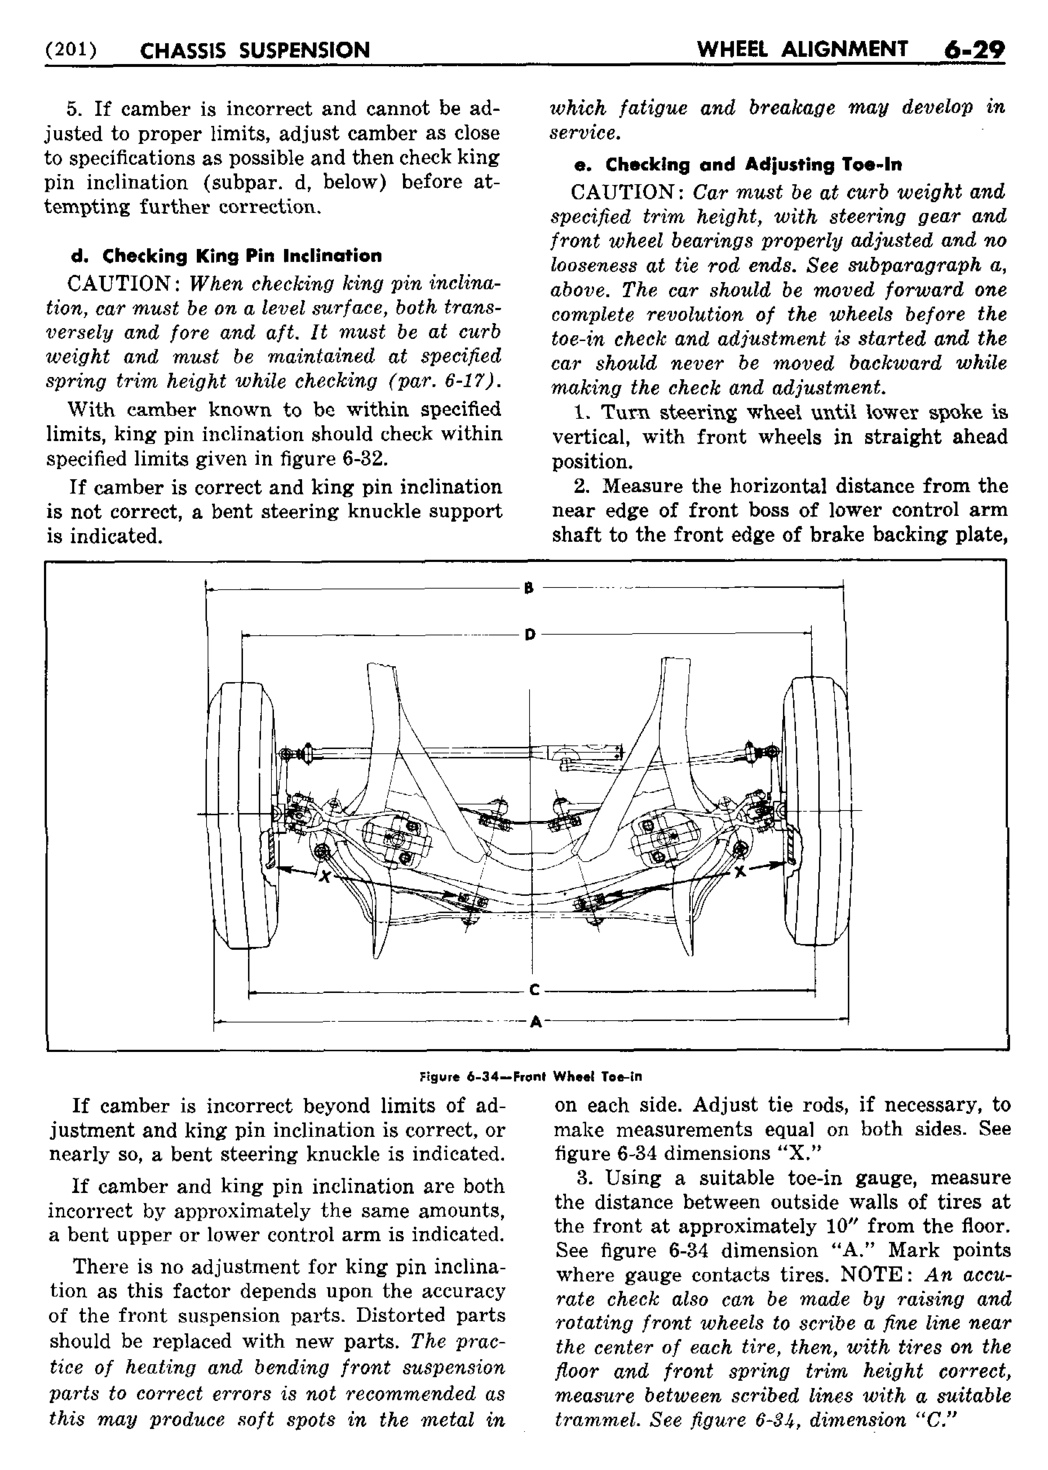 n_07 1950 Buick Shop Manual - Chassis Suspension-029-029.jpg